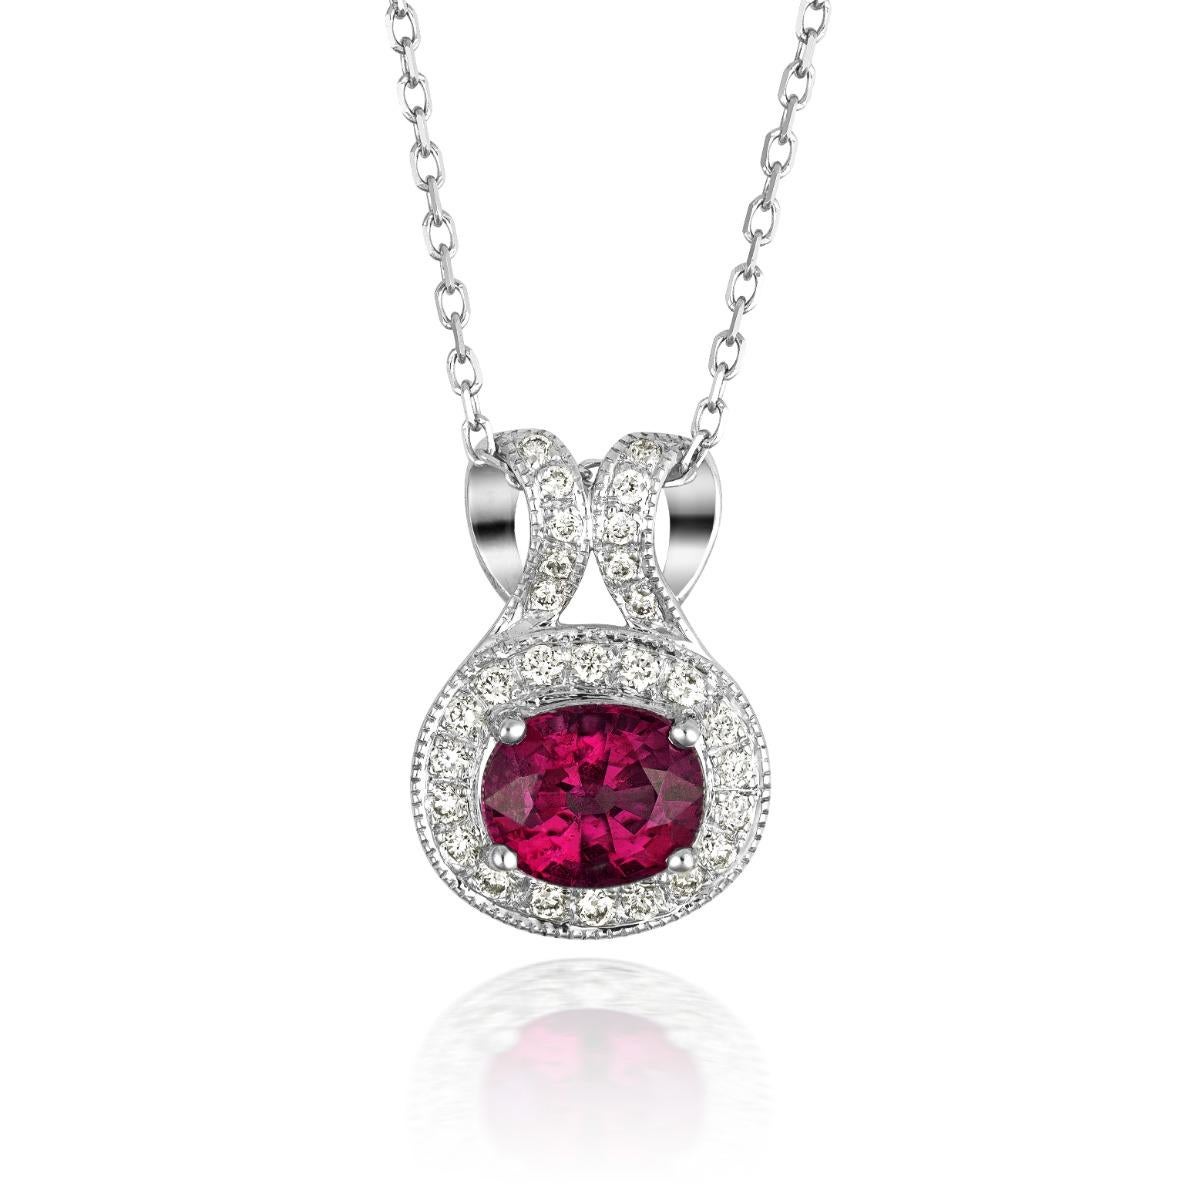 Mixed Cut 0.70 Carats Rubellite Diamonds set in 14K White Gold Pendant For Sale